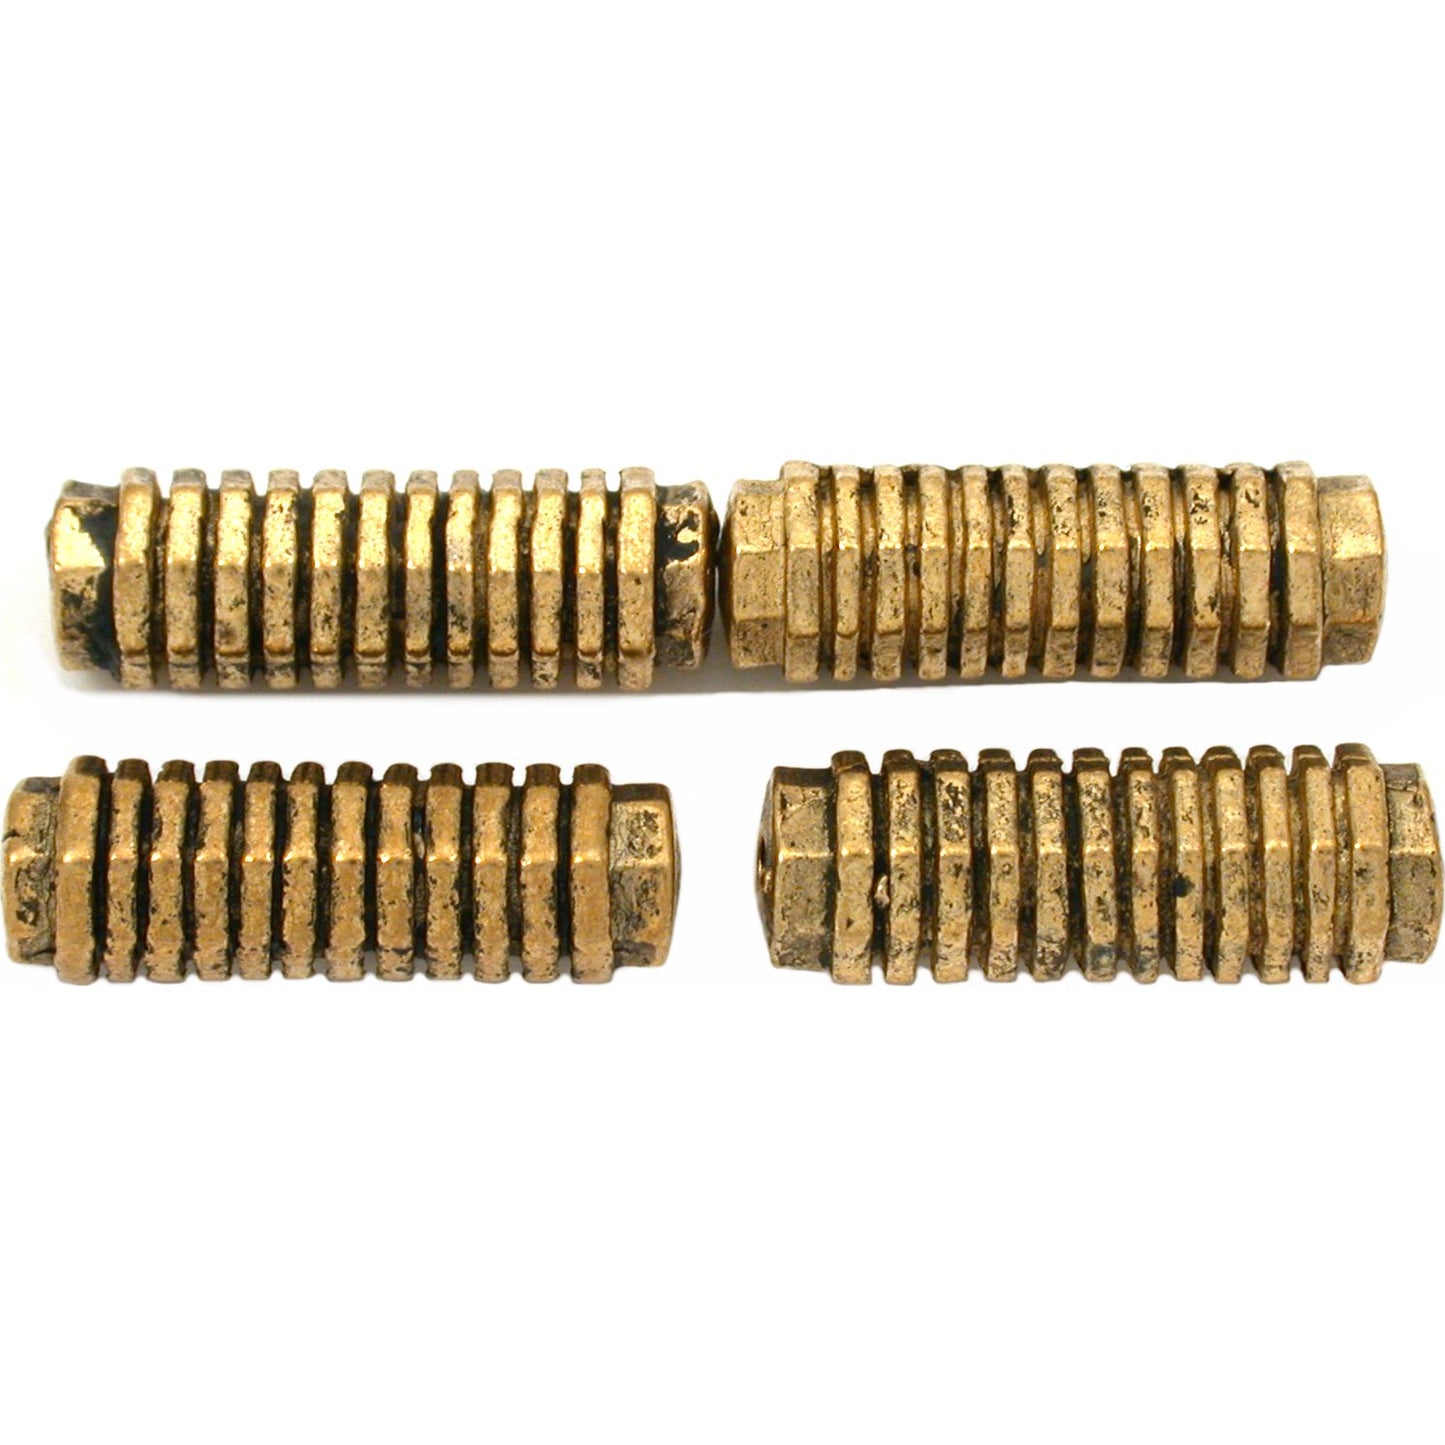 Bali Octagon Tube Antique Gold Plated Beads 20mm 15 Grams 4Pcs Approx.